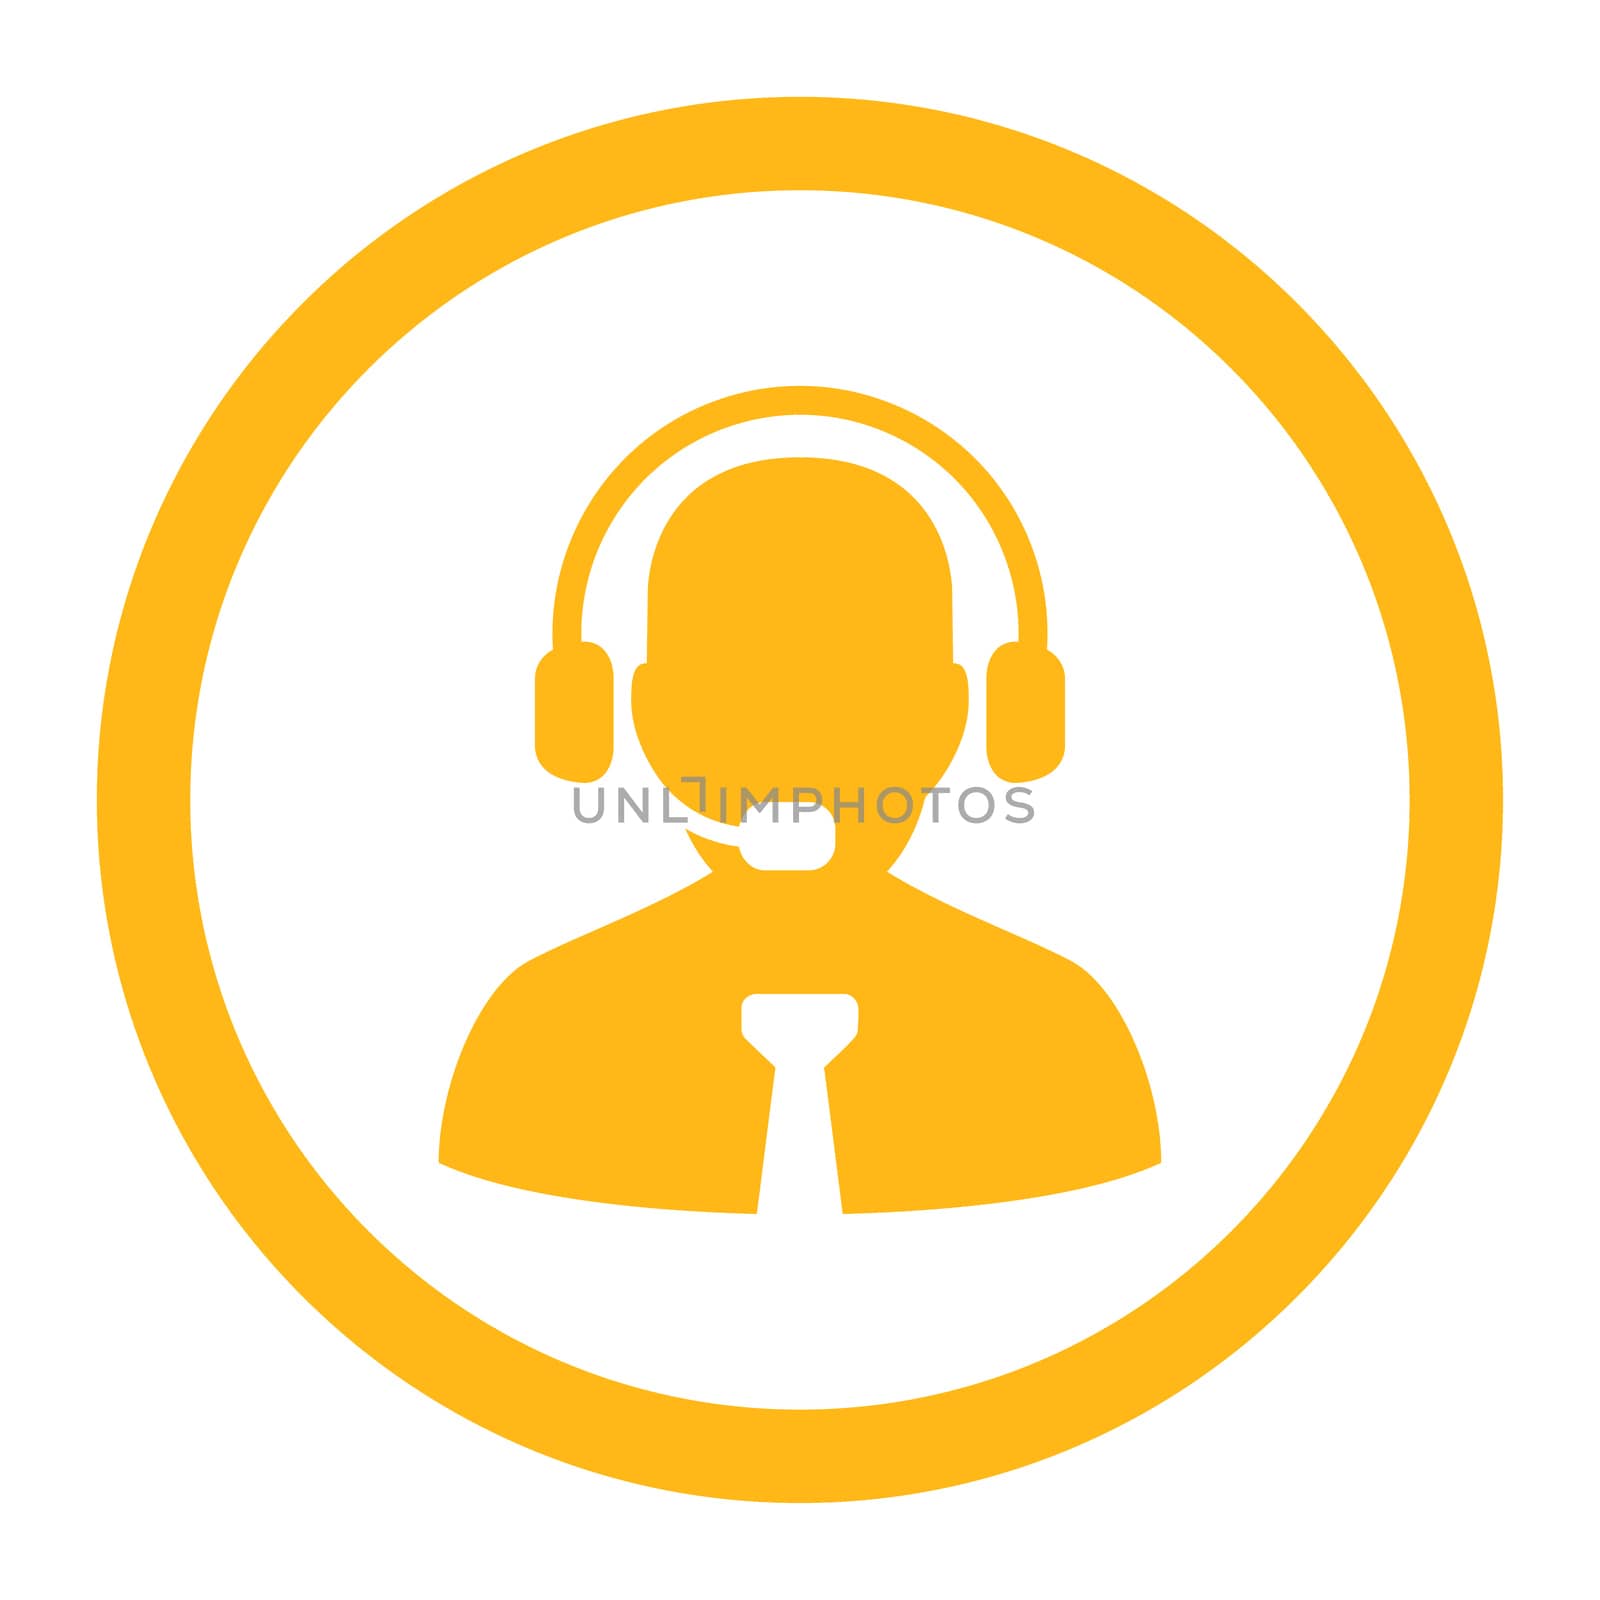 Support chat glyph icon. This rounded flat symbol is drawn with yellow color on a white background.